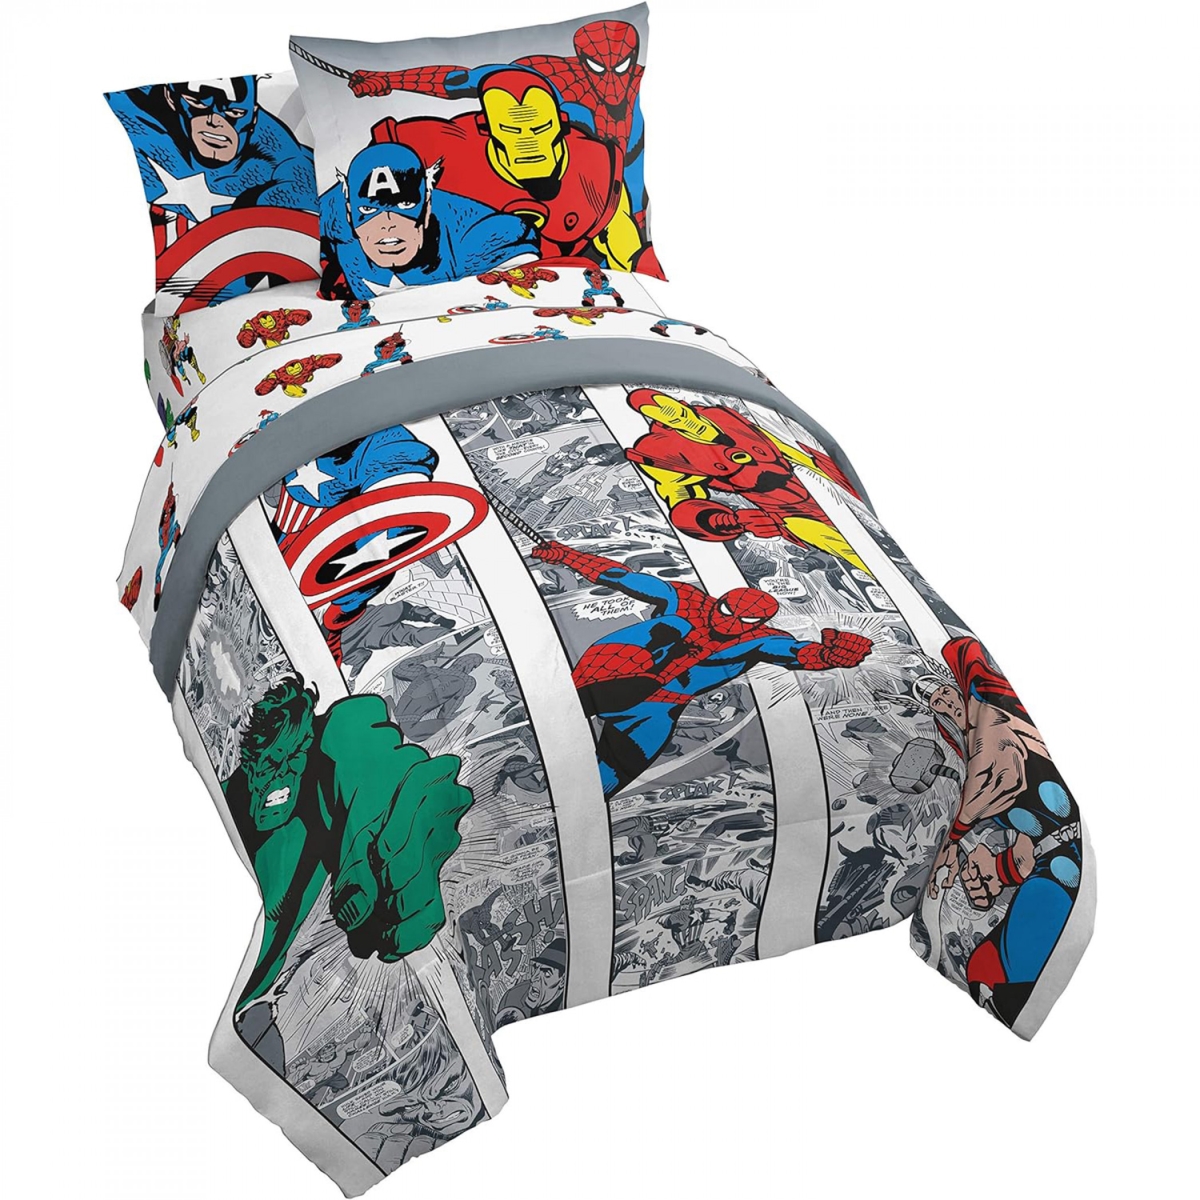 Picture of The Avengers 875215 Avengers Retro Comic Panels Sheet Set with Comforter - Twin Size